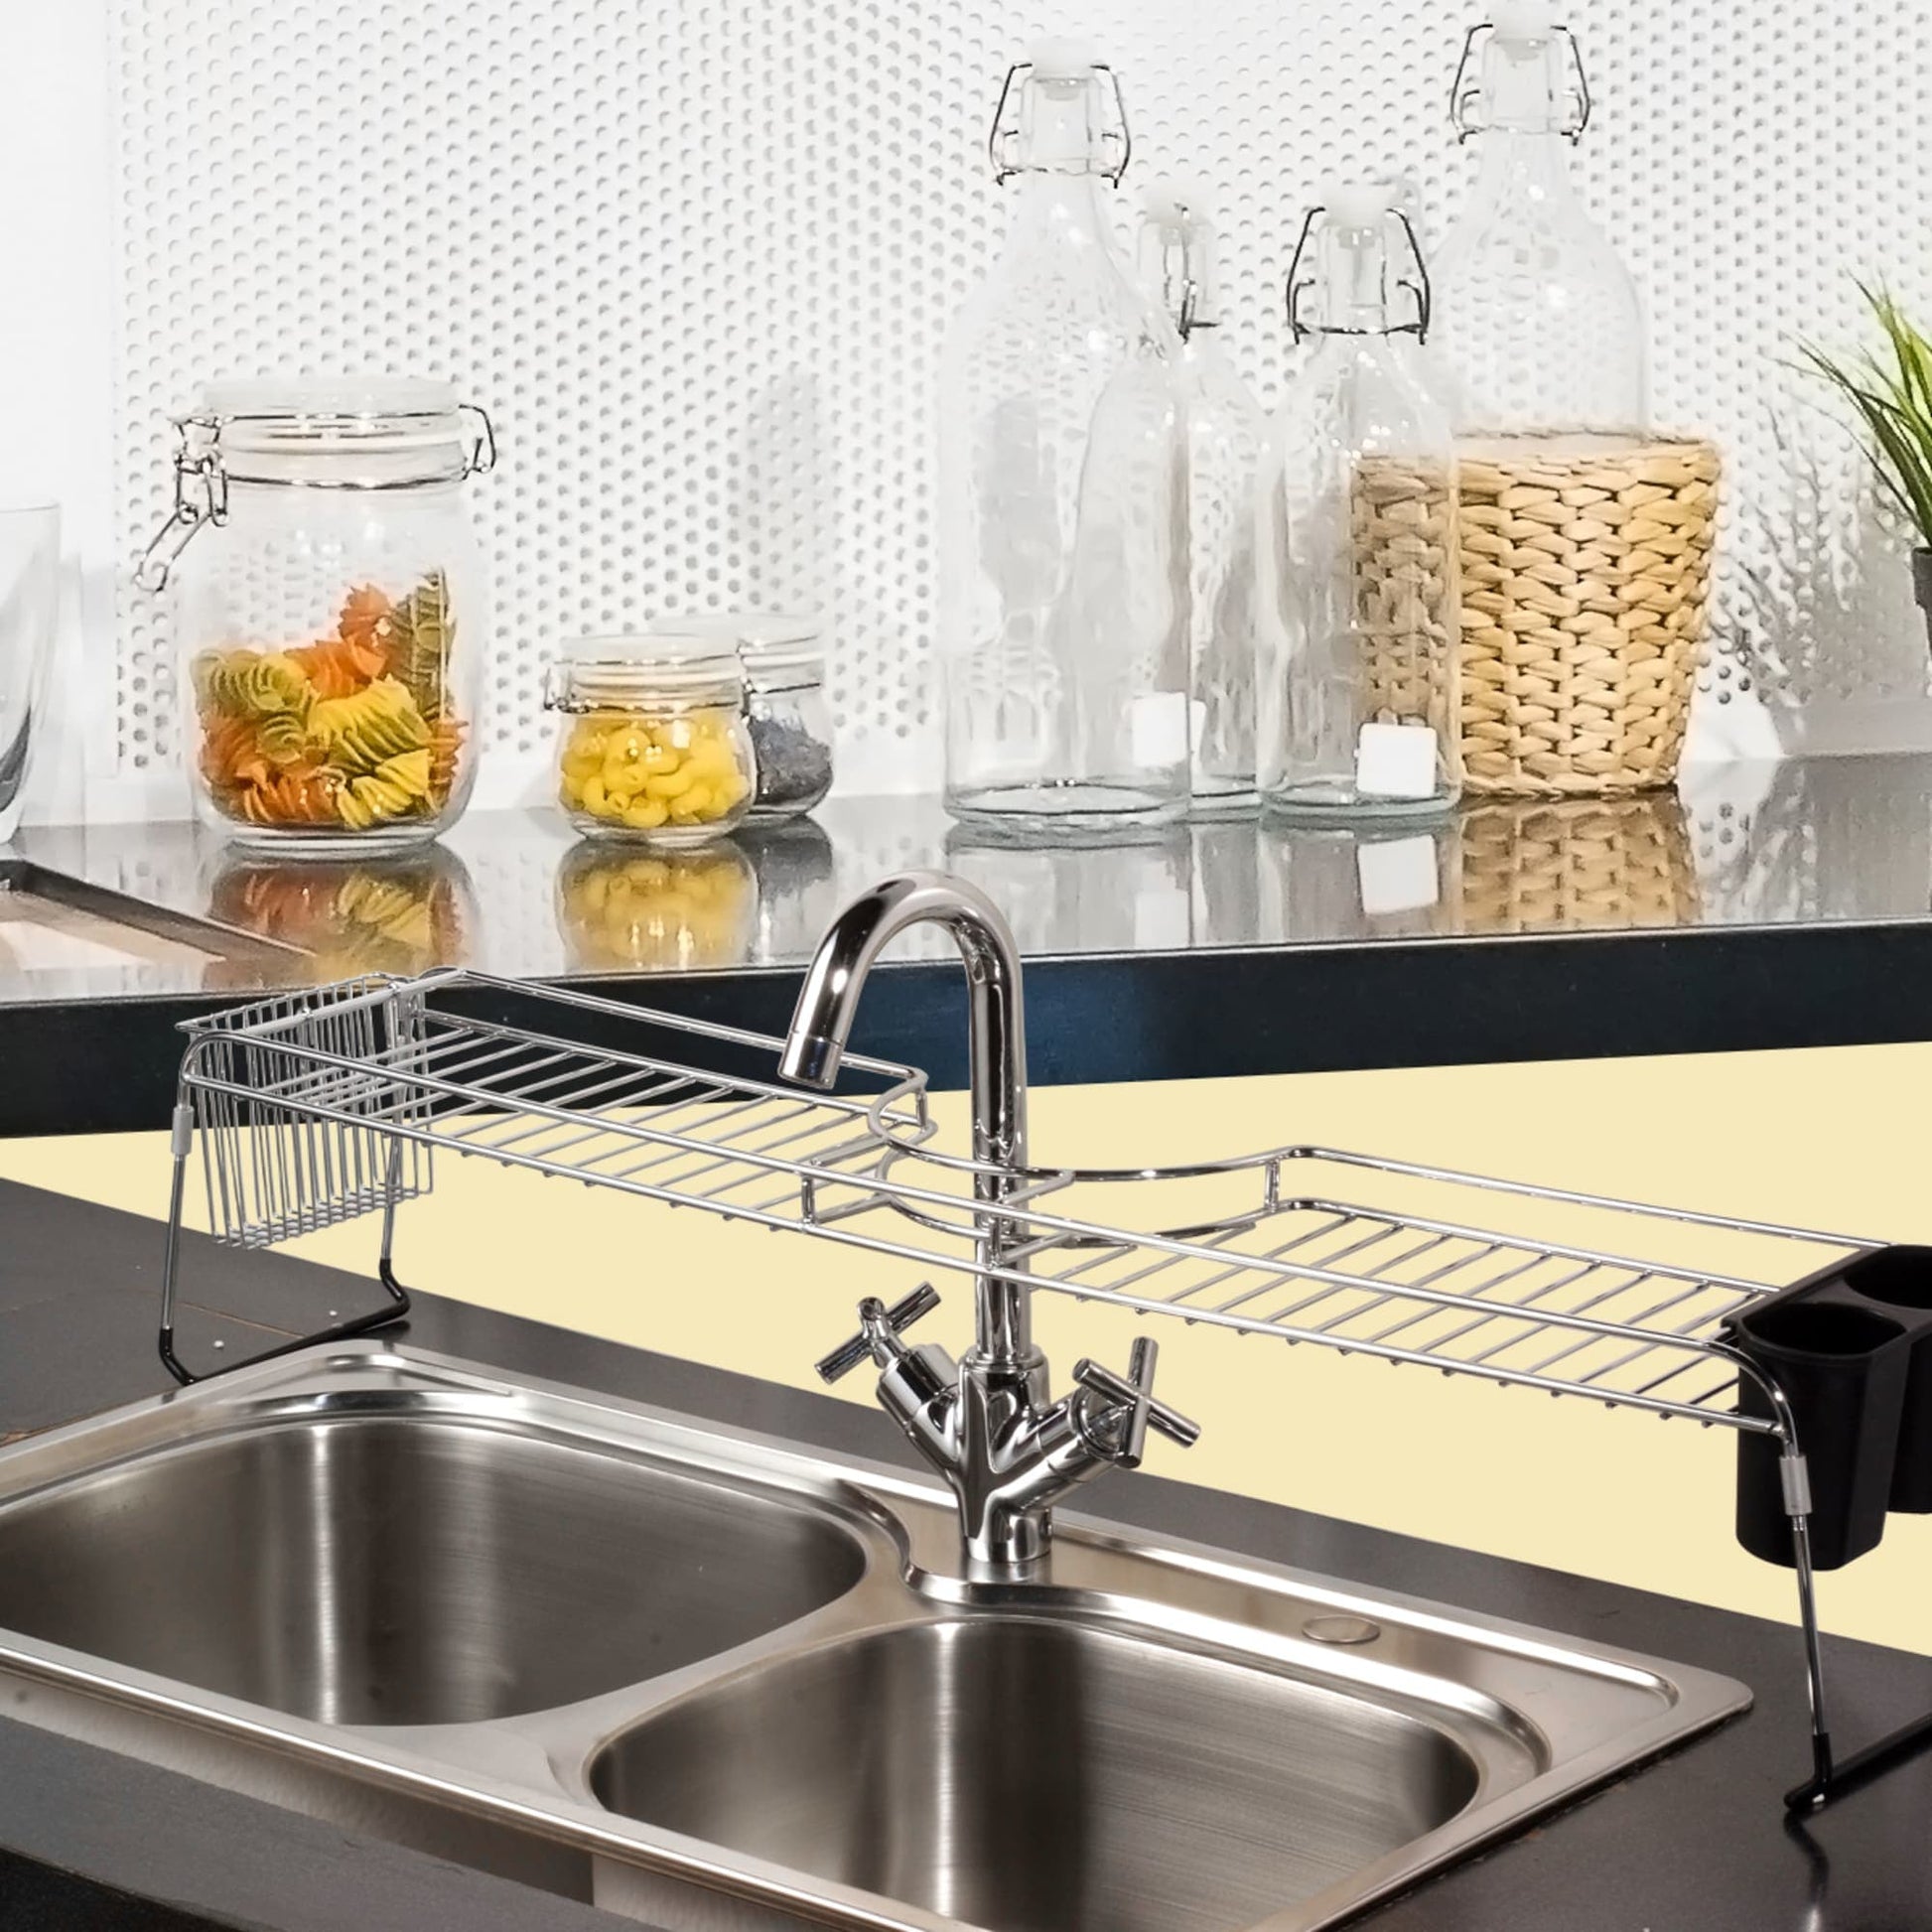 Chrome Plated Steel Faucet Spacer Over the Sink Shelf with Cutlery